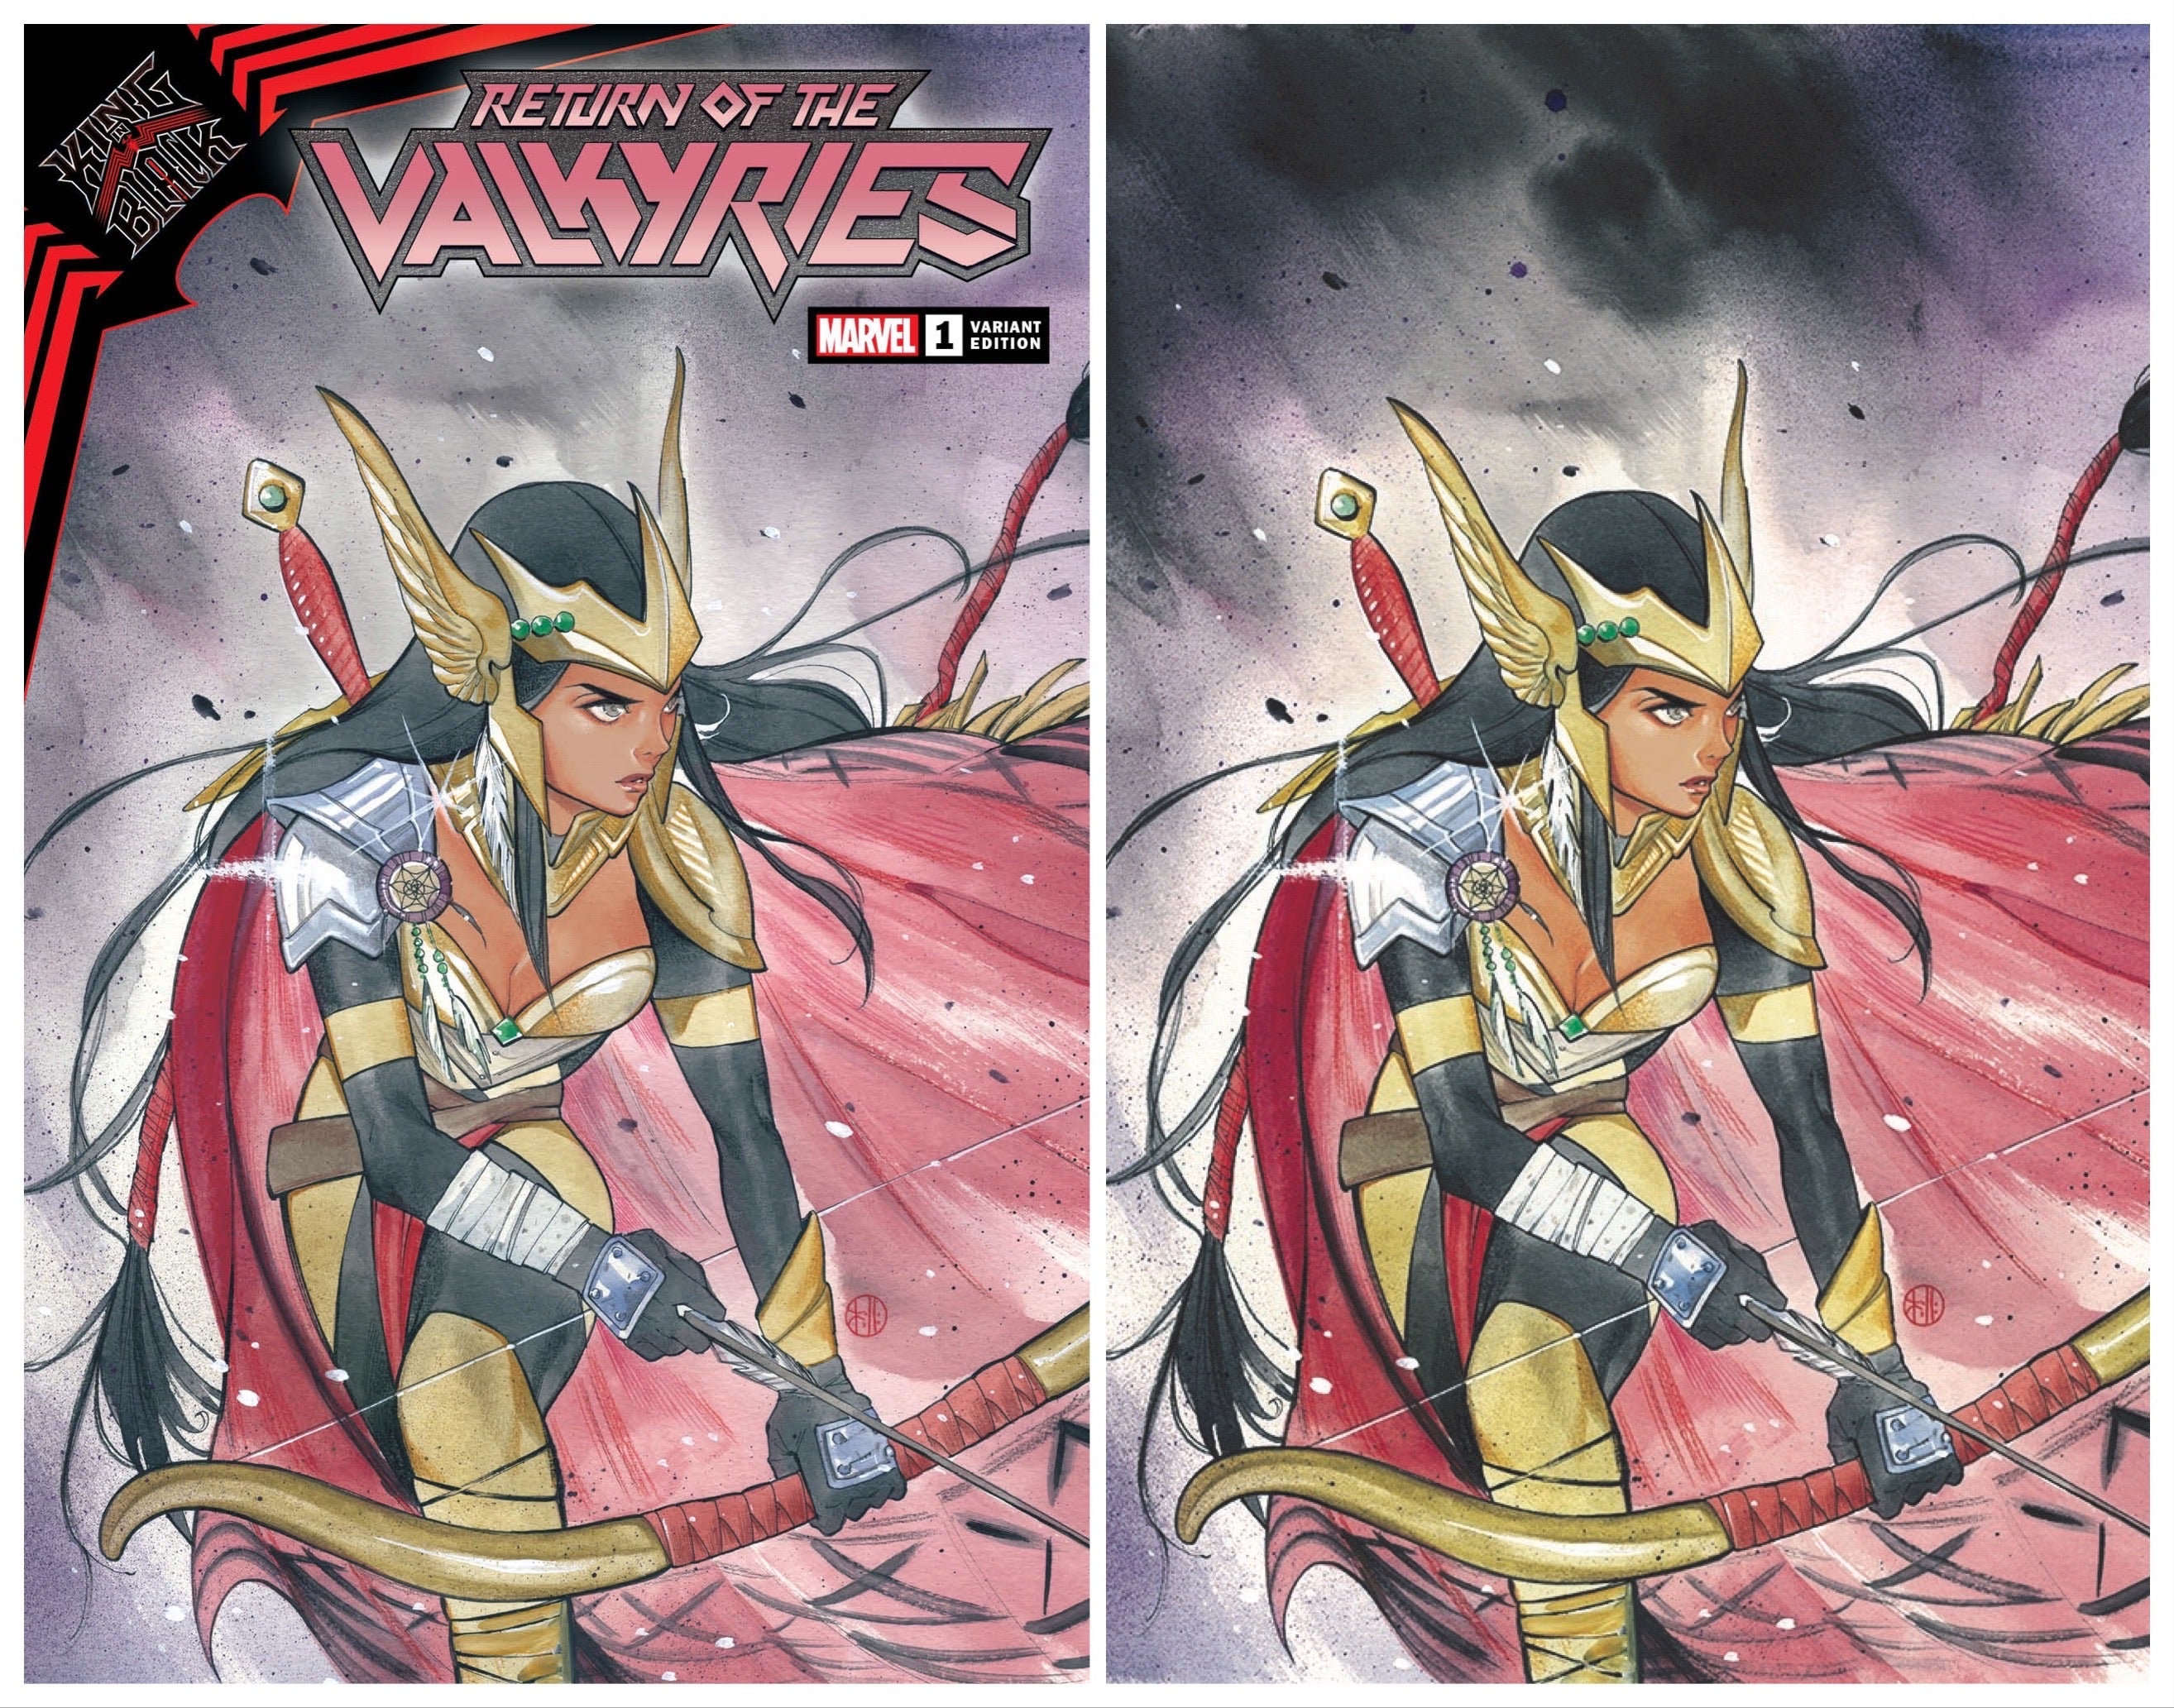 KING IN BLACK RETURN OF VALKYRIES #1 PEACH MOMOKO EXCLUSIVE VARIANT COVERS RAW & CGC GRADED OPTIONS